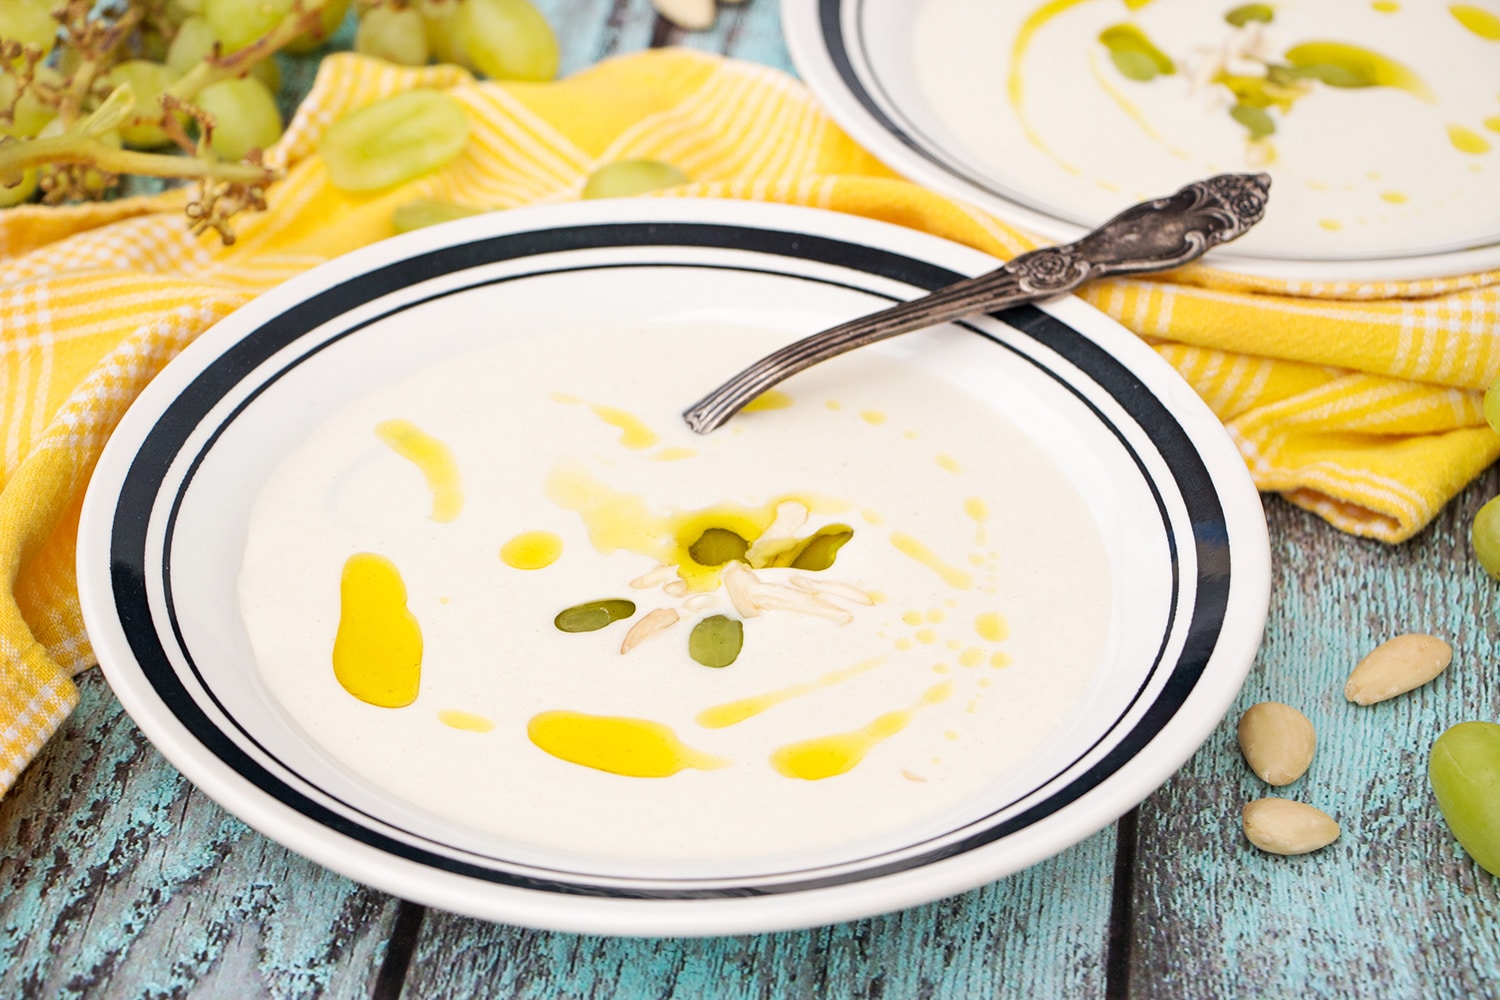 Ajo Blanco is your answer to the summer heat! Almonds, garlic, bread, olive oil, and grapes combined together to create this chilled Spanish soup! | cookingtheglobe.com